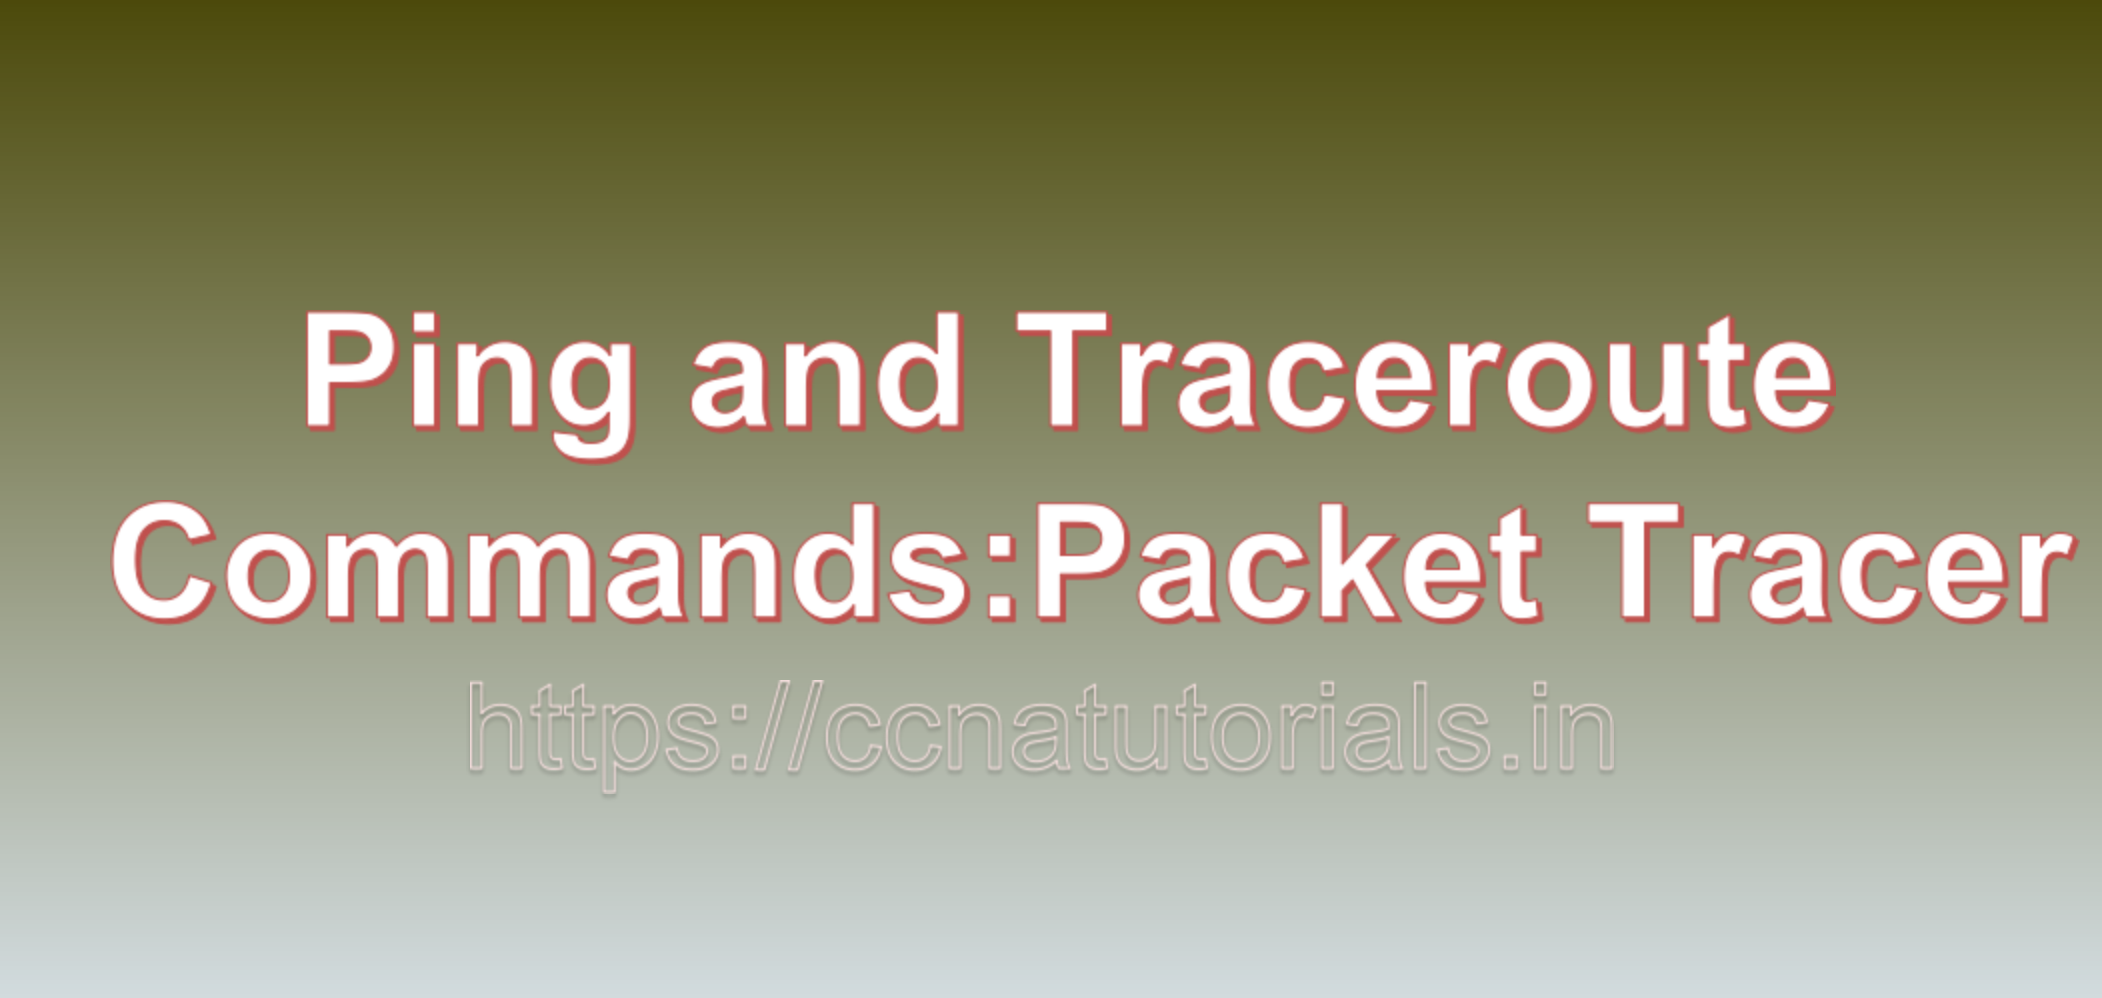 The Purpose of Ping and Traceroute Commands in Packet Tracer, ccna, ccna tutorials